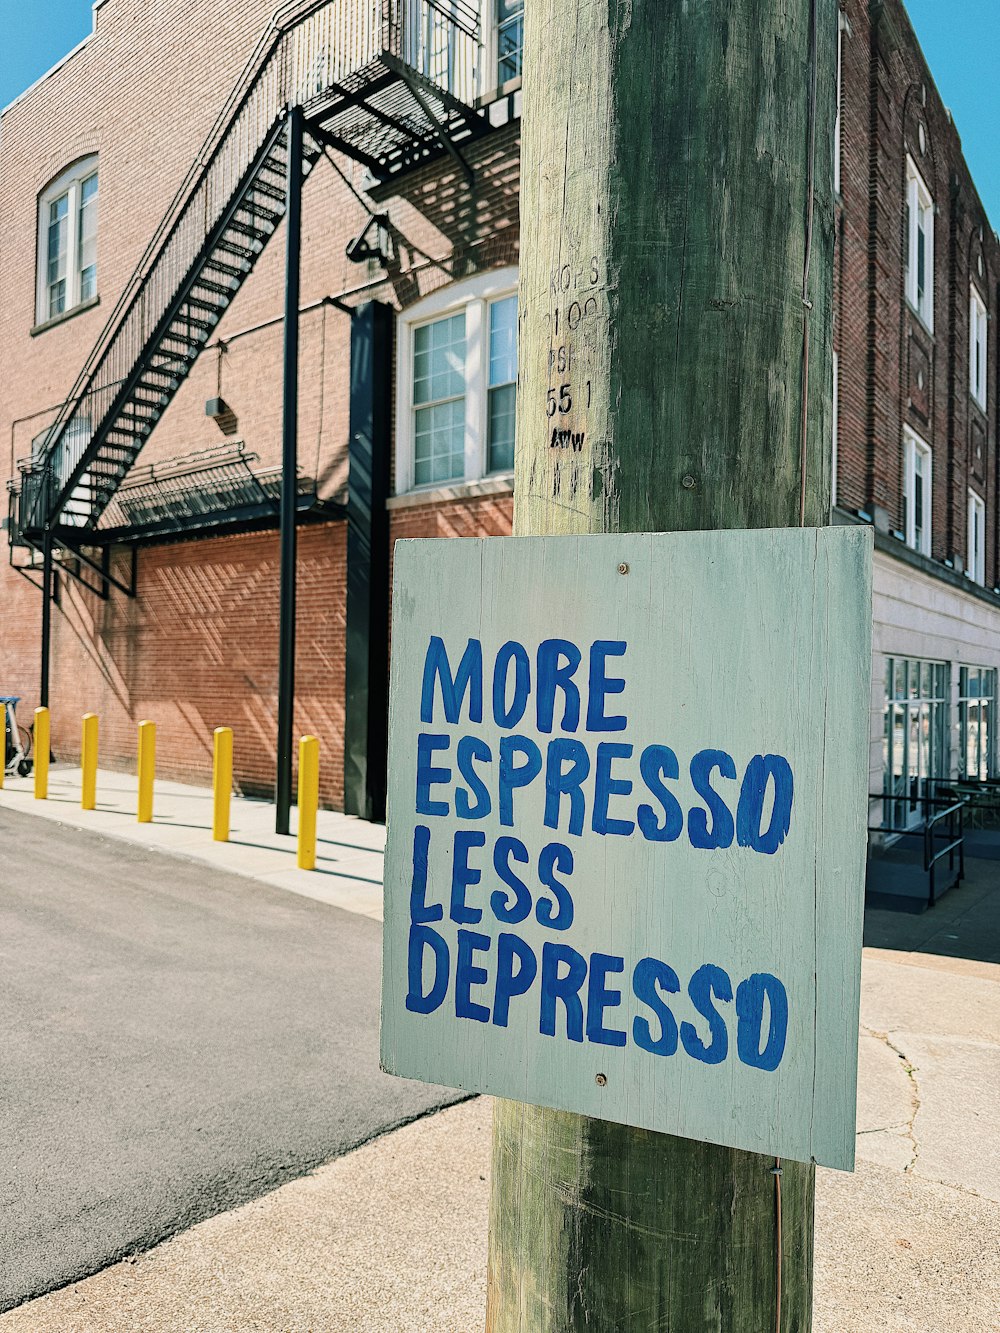 a sign on a telephone pole that says more espresso less depresso